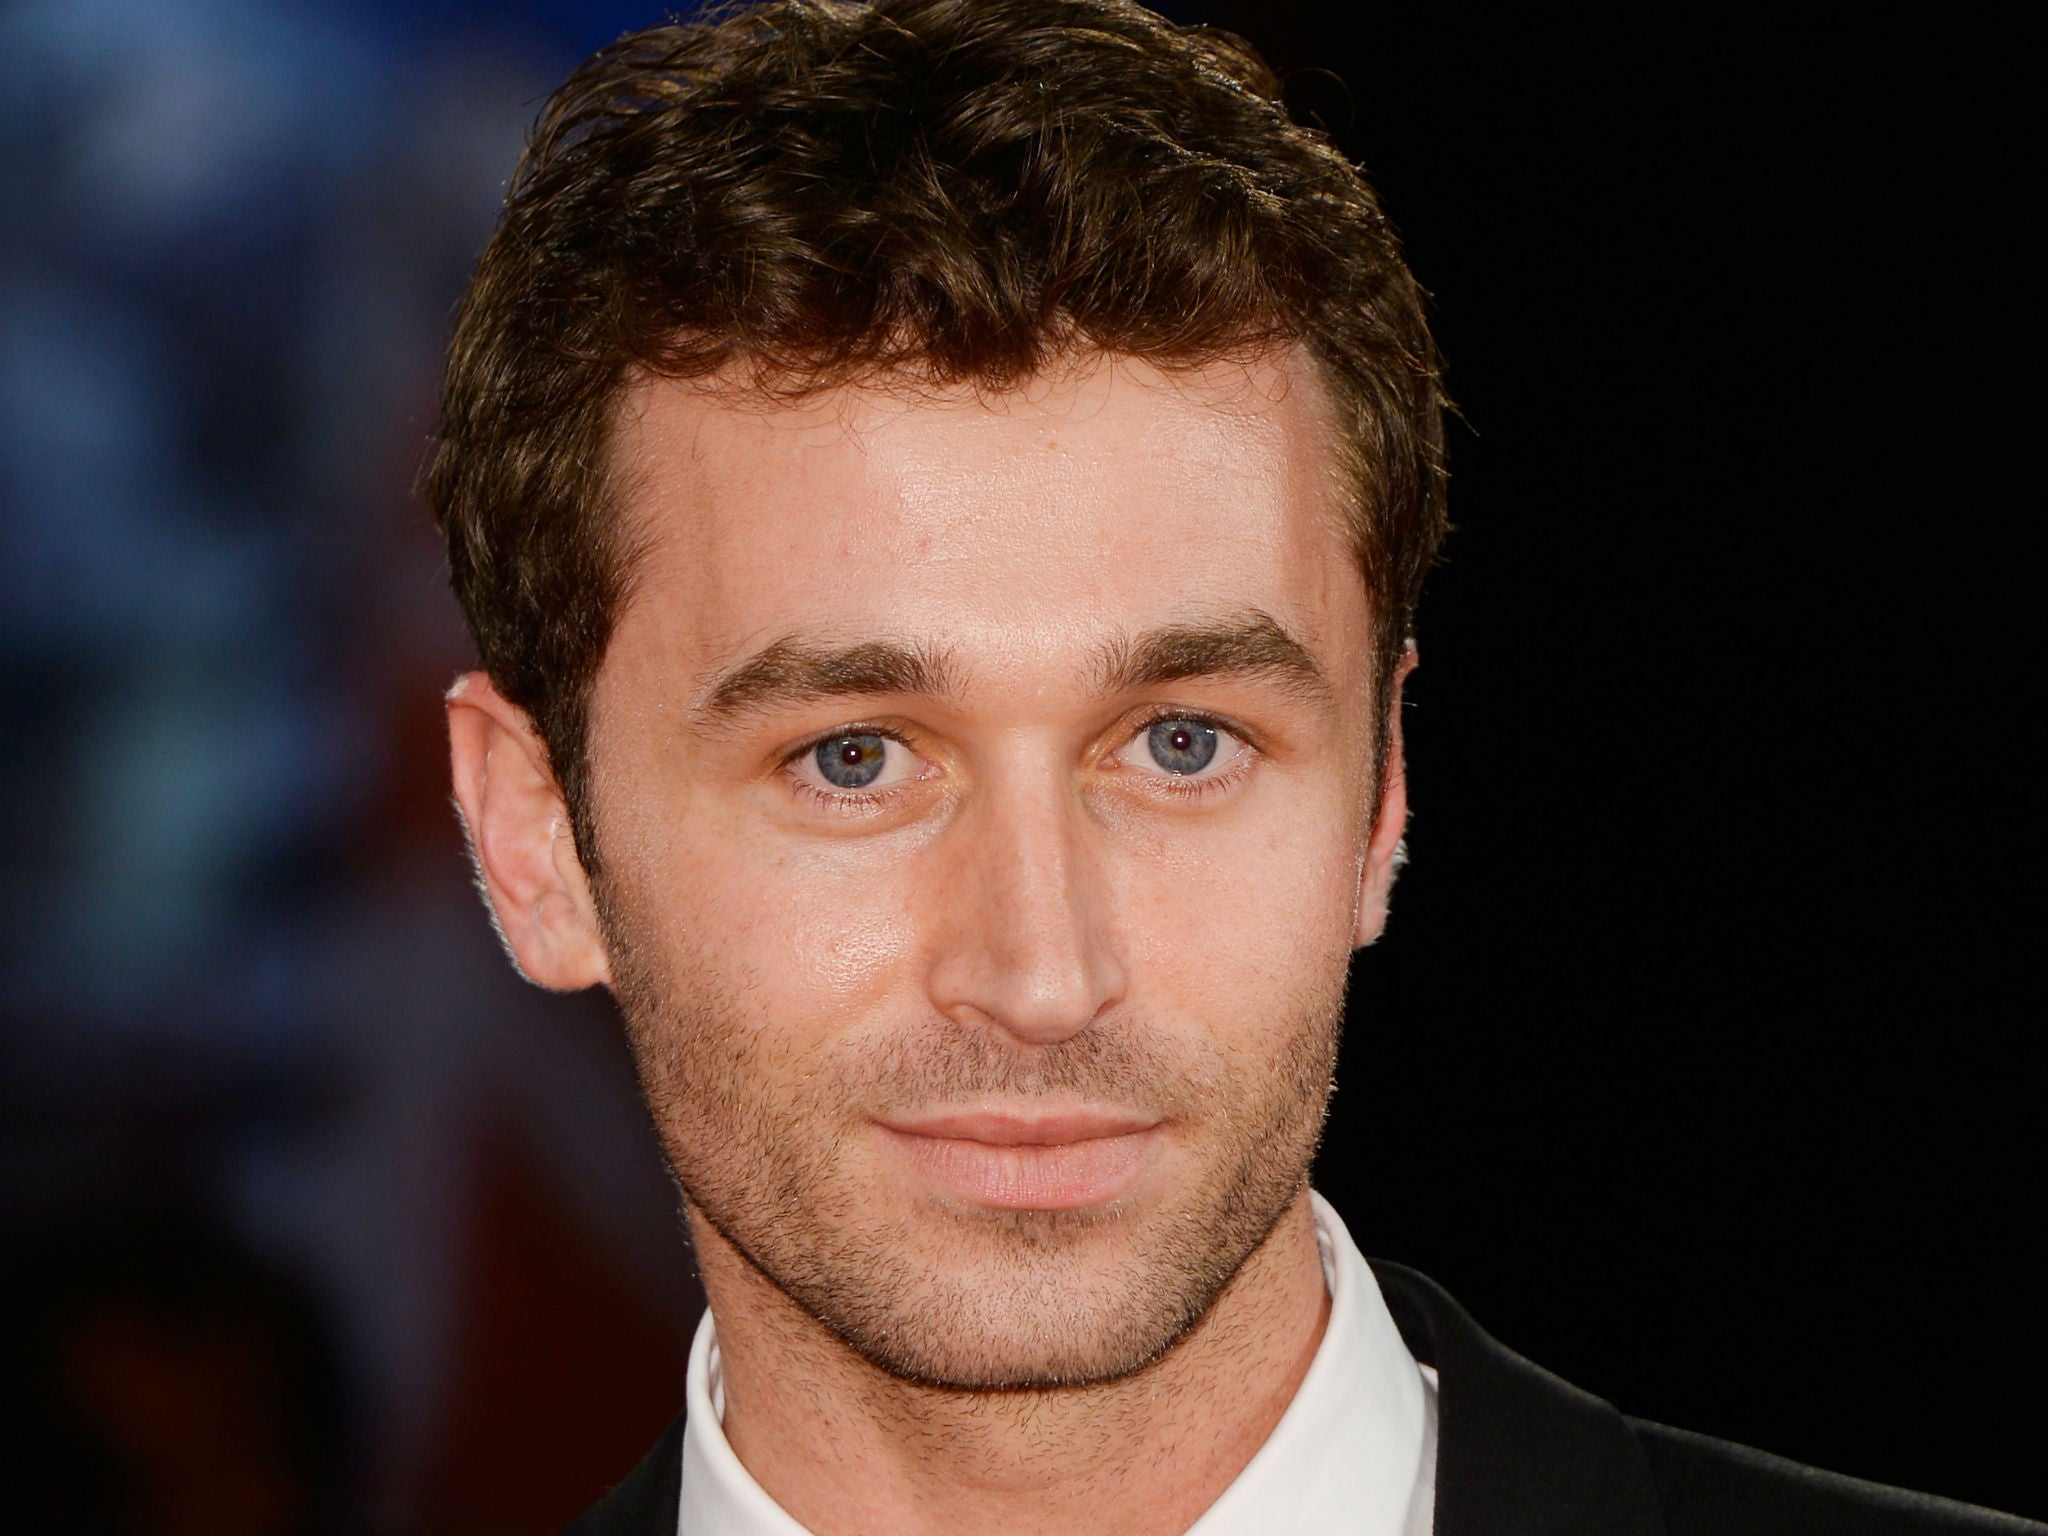 Gemes Deen - James Deen: Porn actor 'baffled' by rape claims and issues further ...